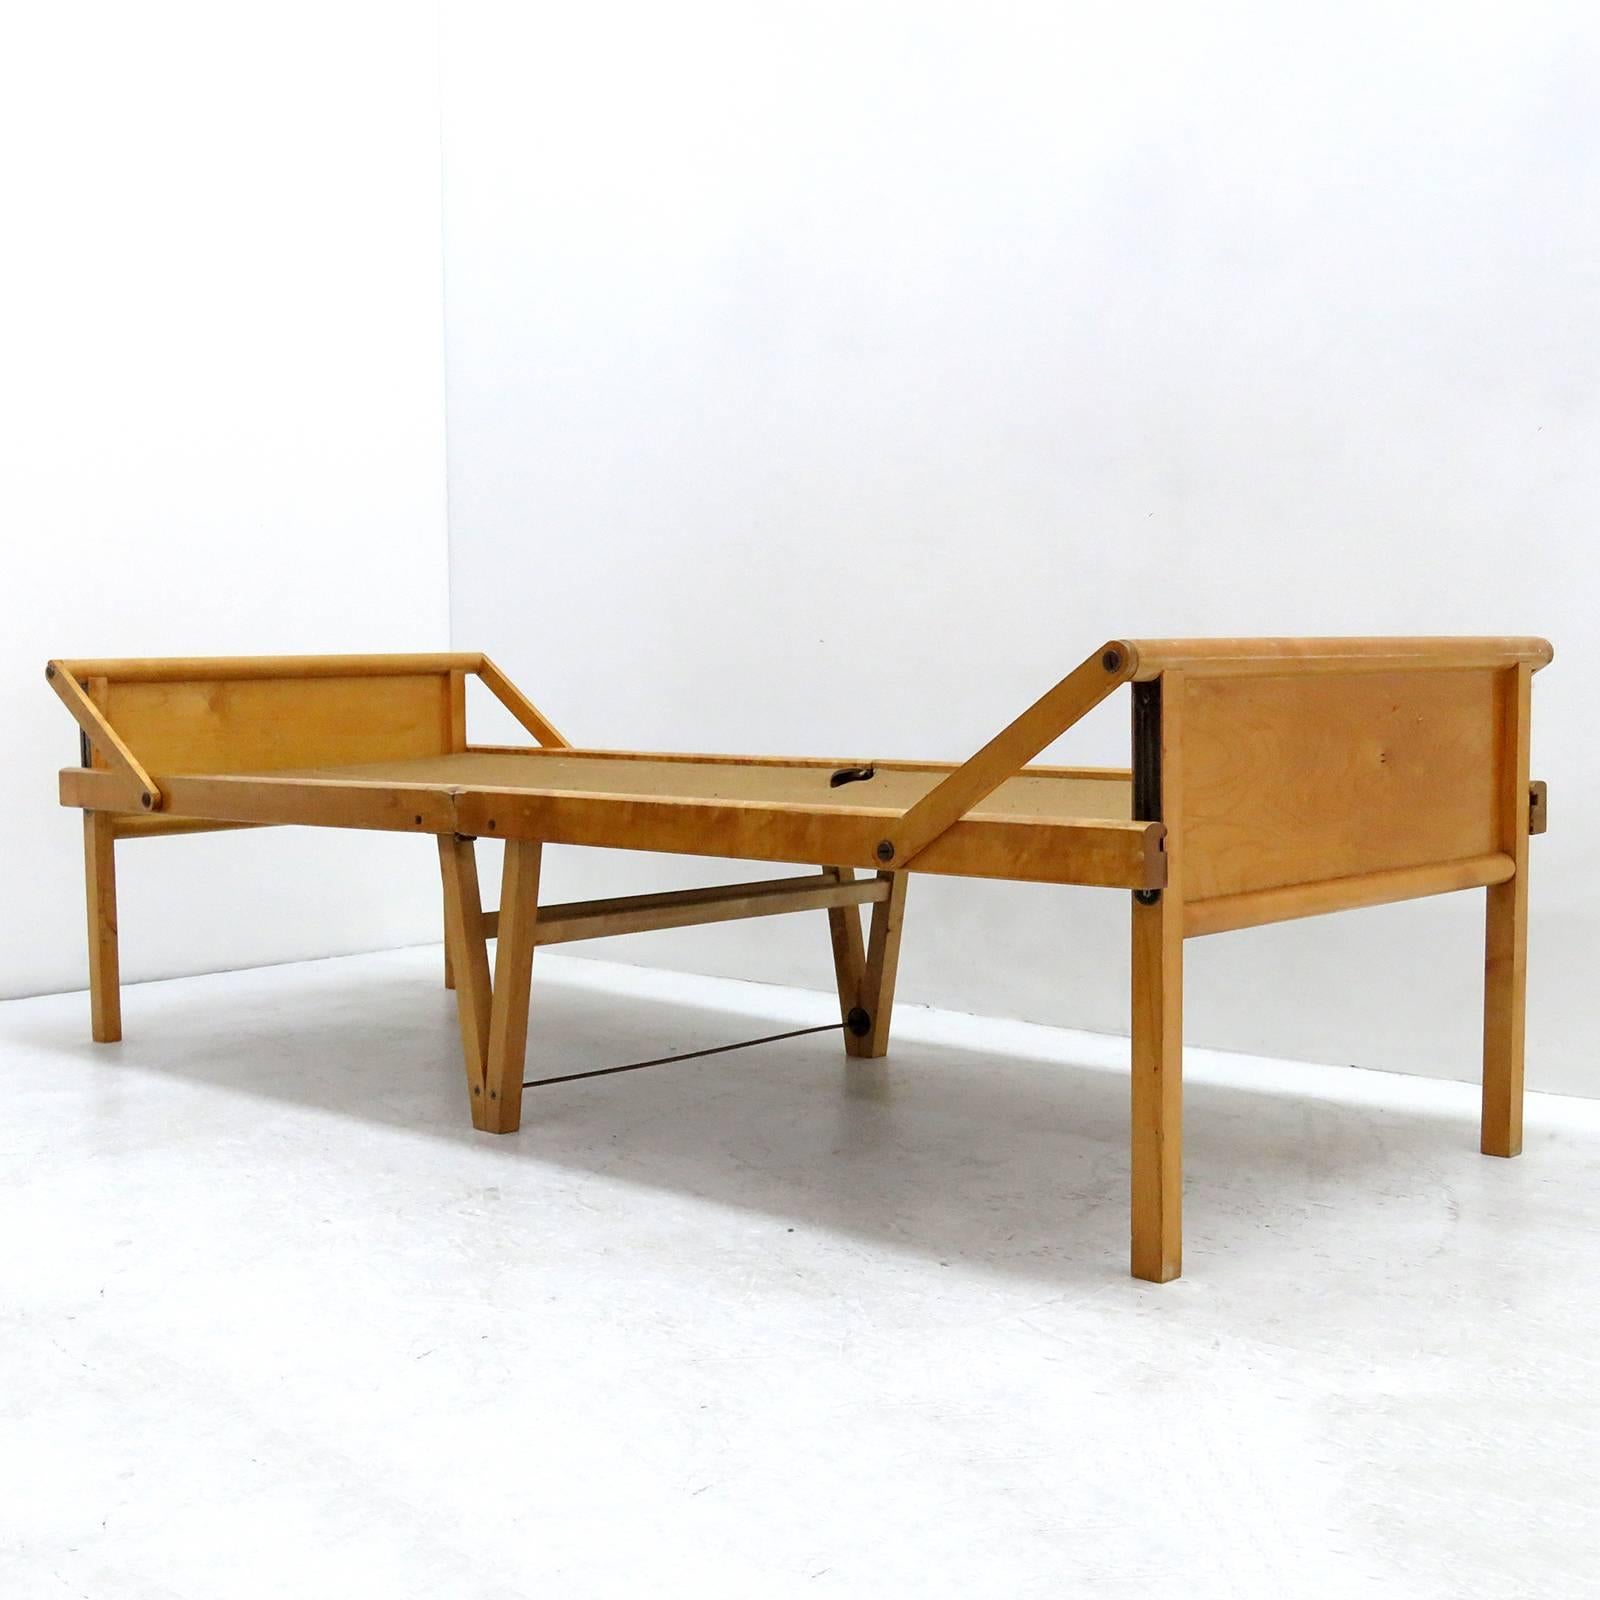 Mid-20th Century Folding Bed by Brdr. Johansson